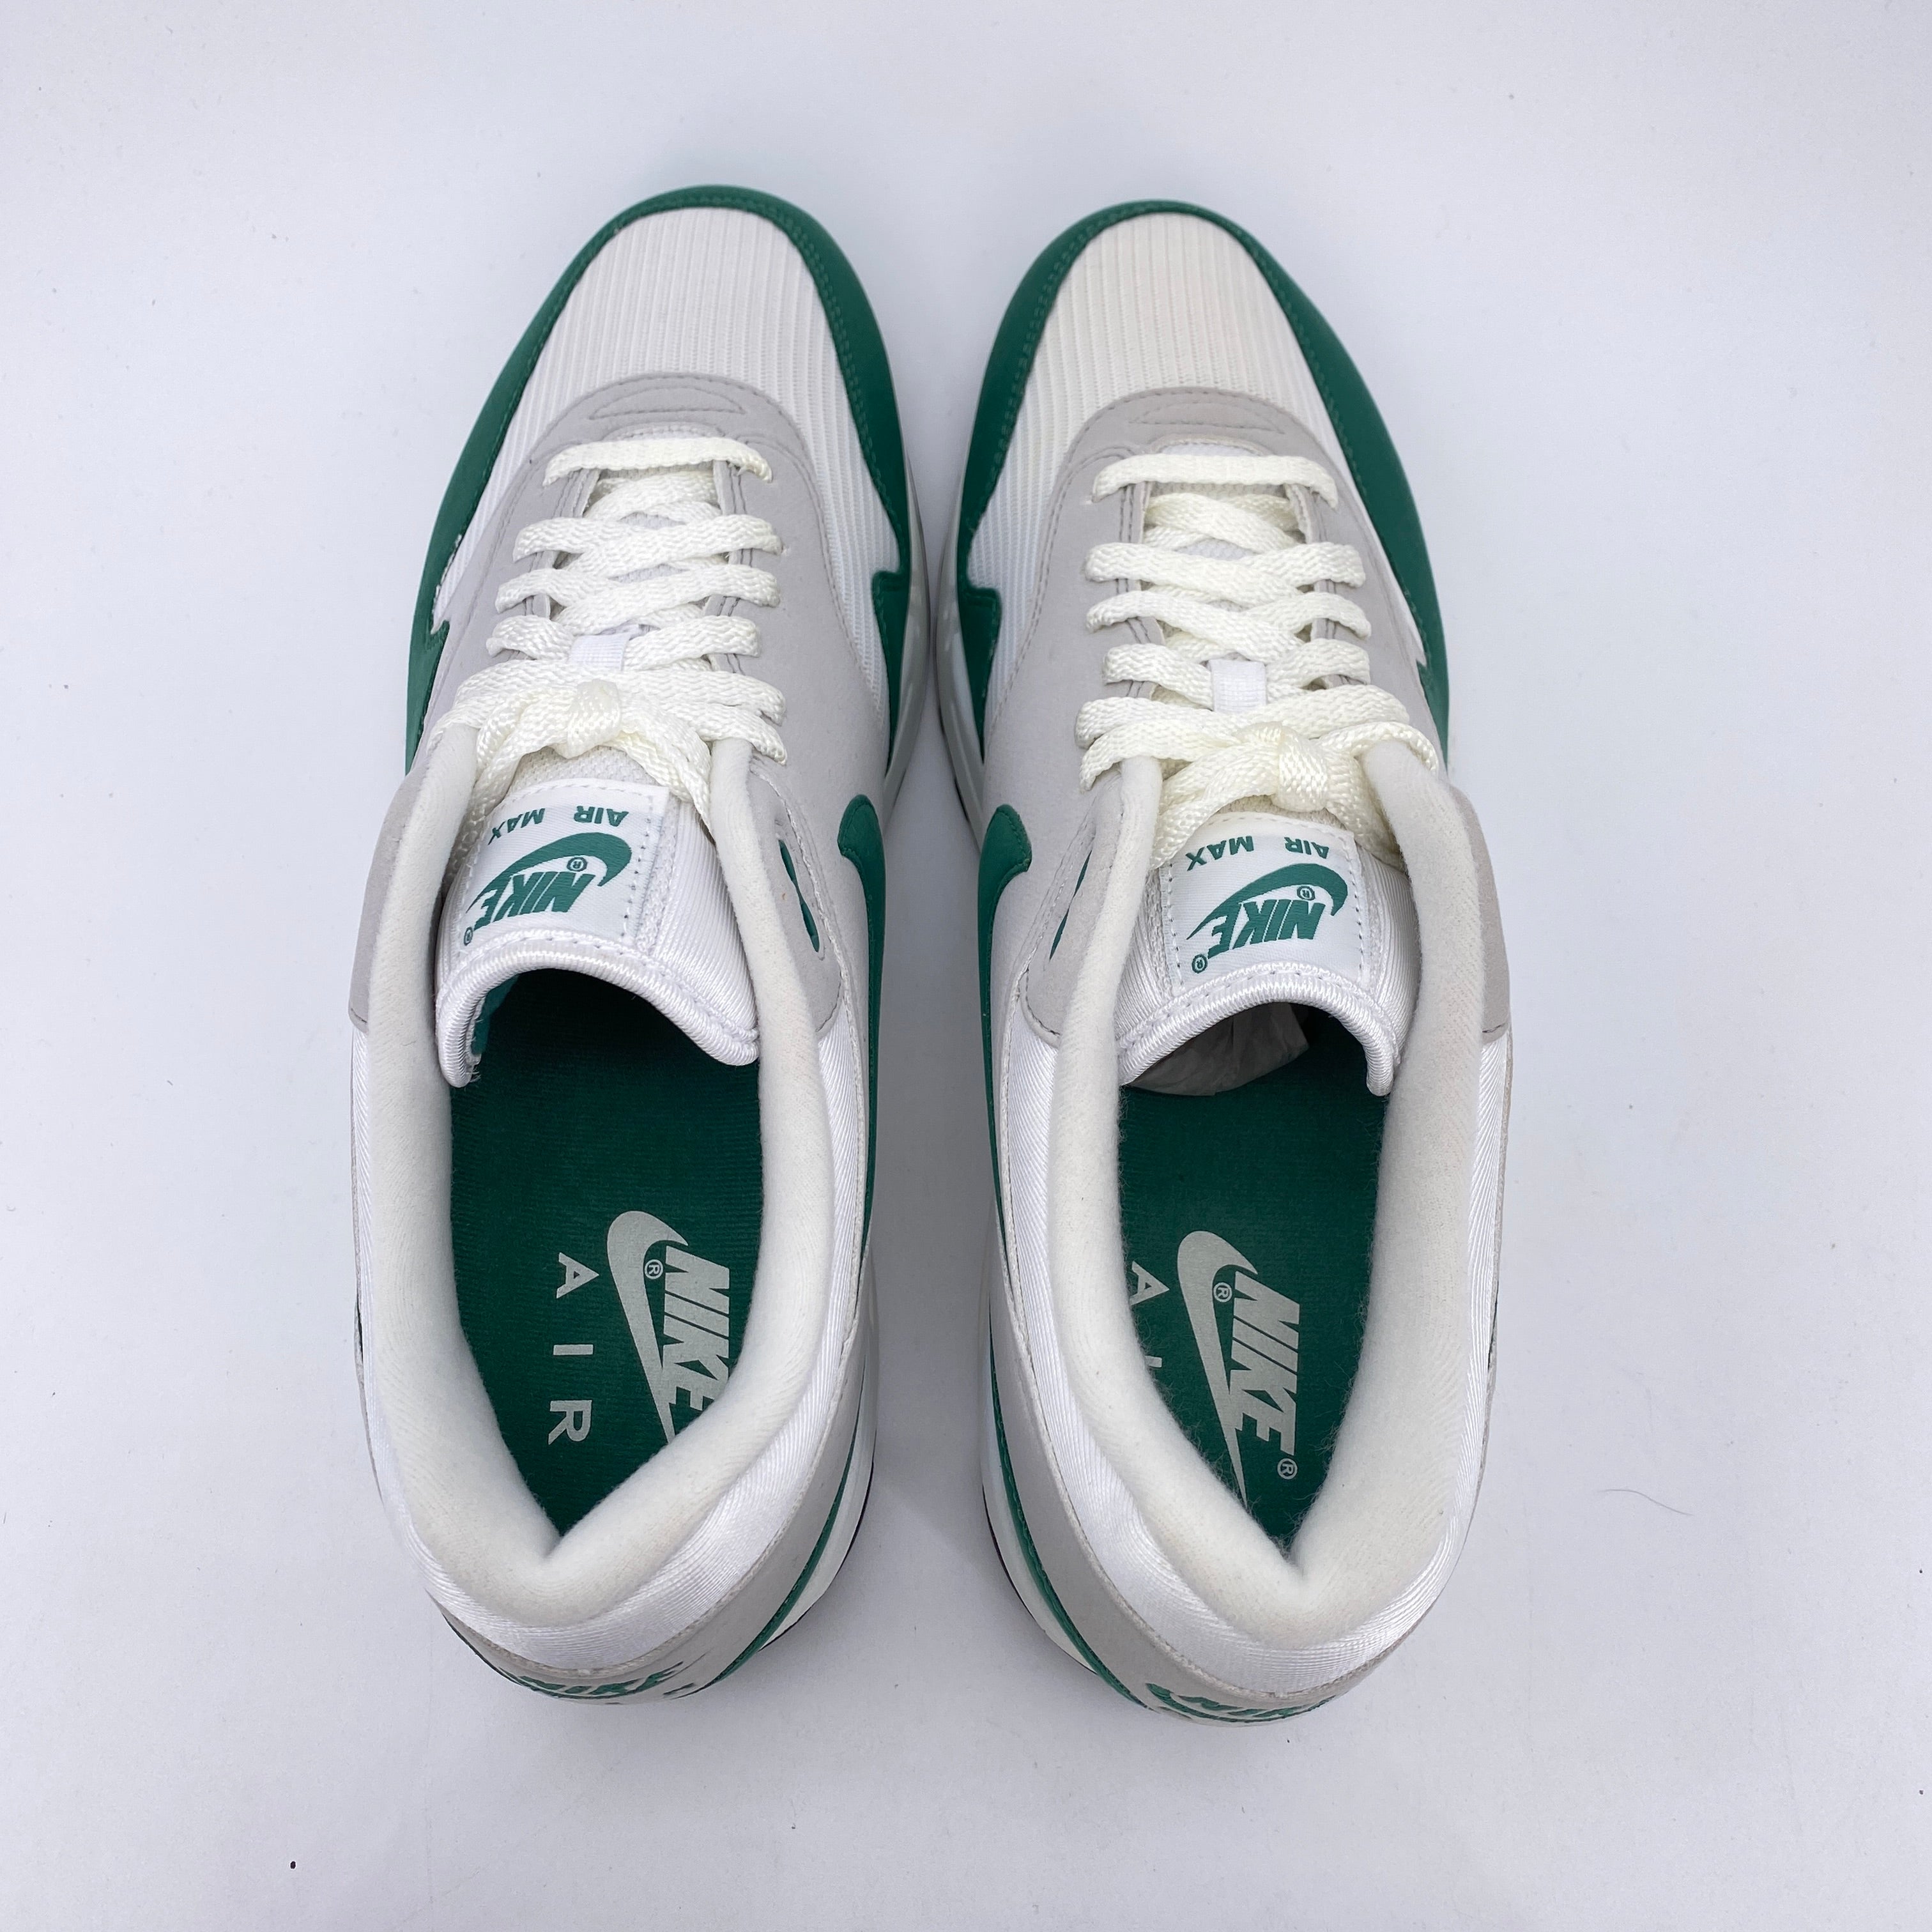 Nike Air Max 1 &quot;Anniversary Green&quot; 2020 New Size 12